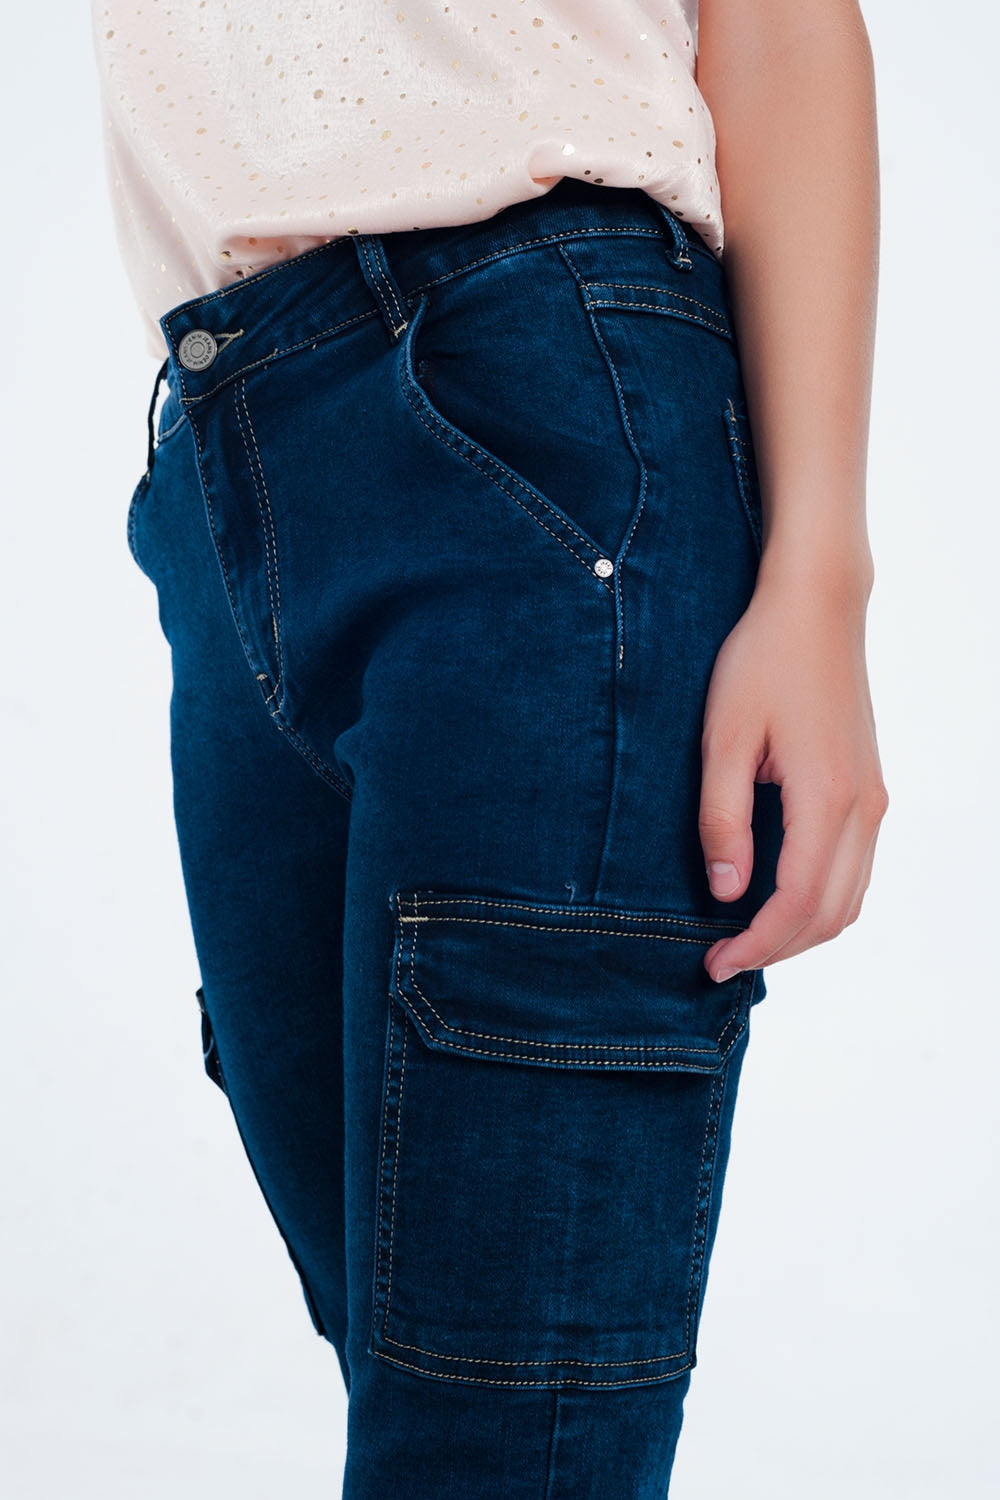 Jeans in navy with cargo pockets Szua Store